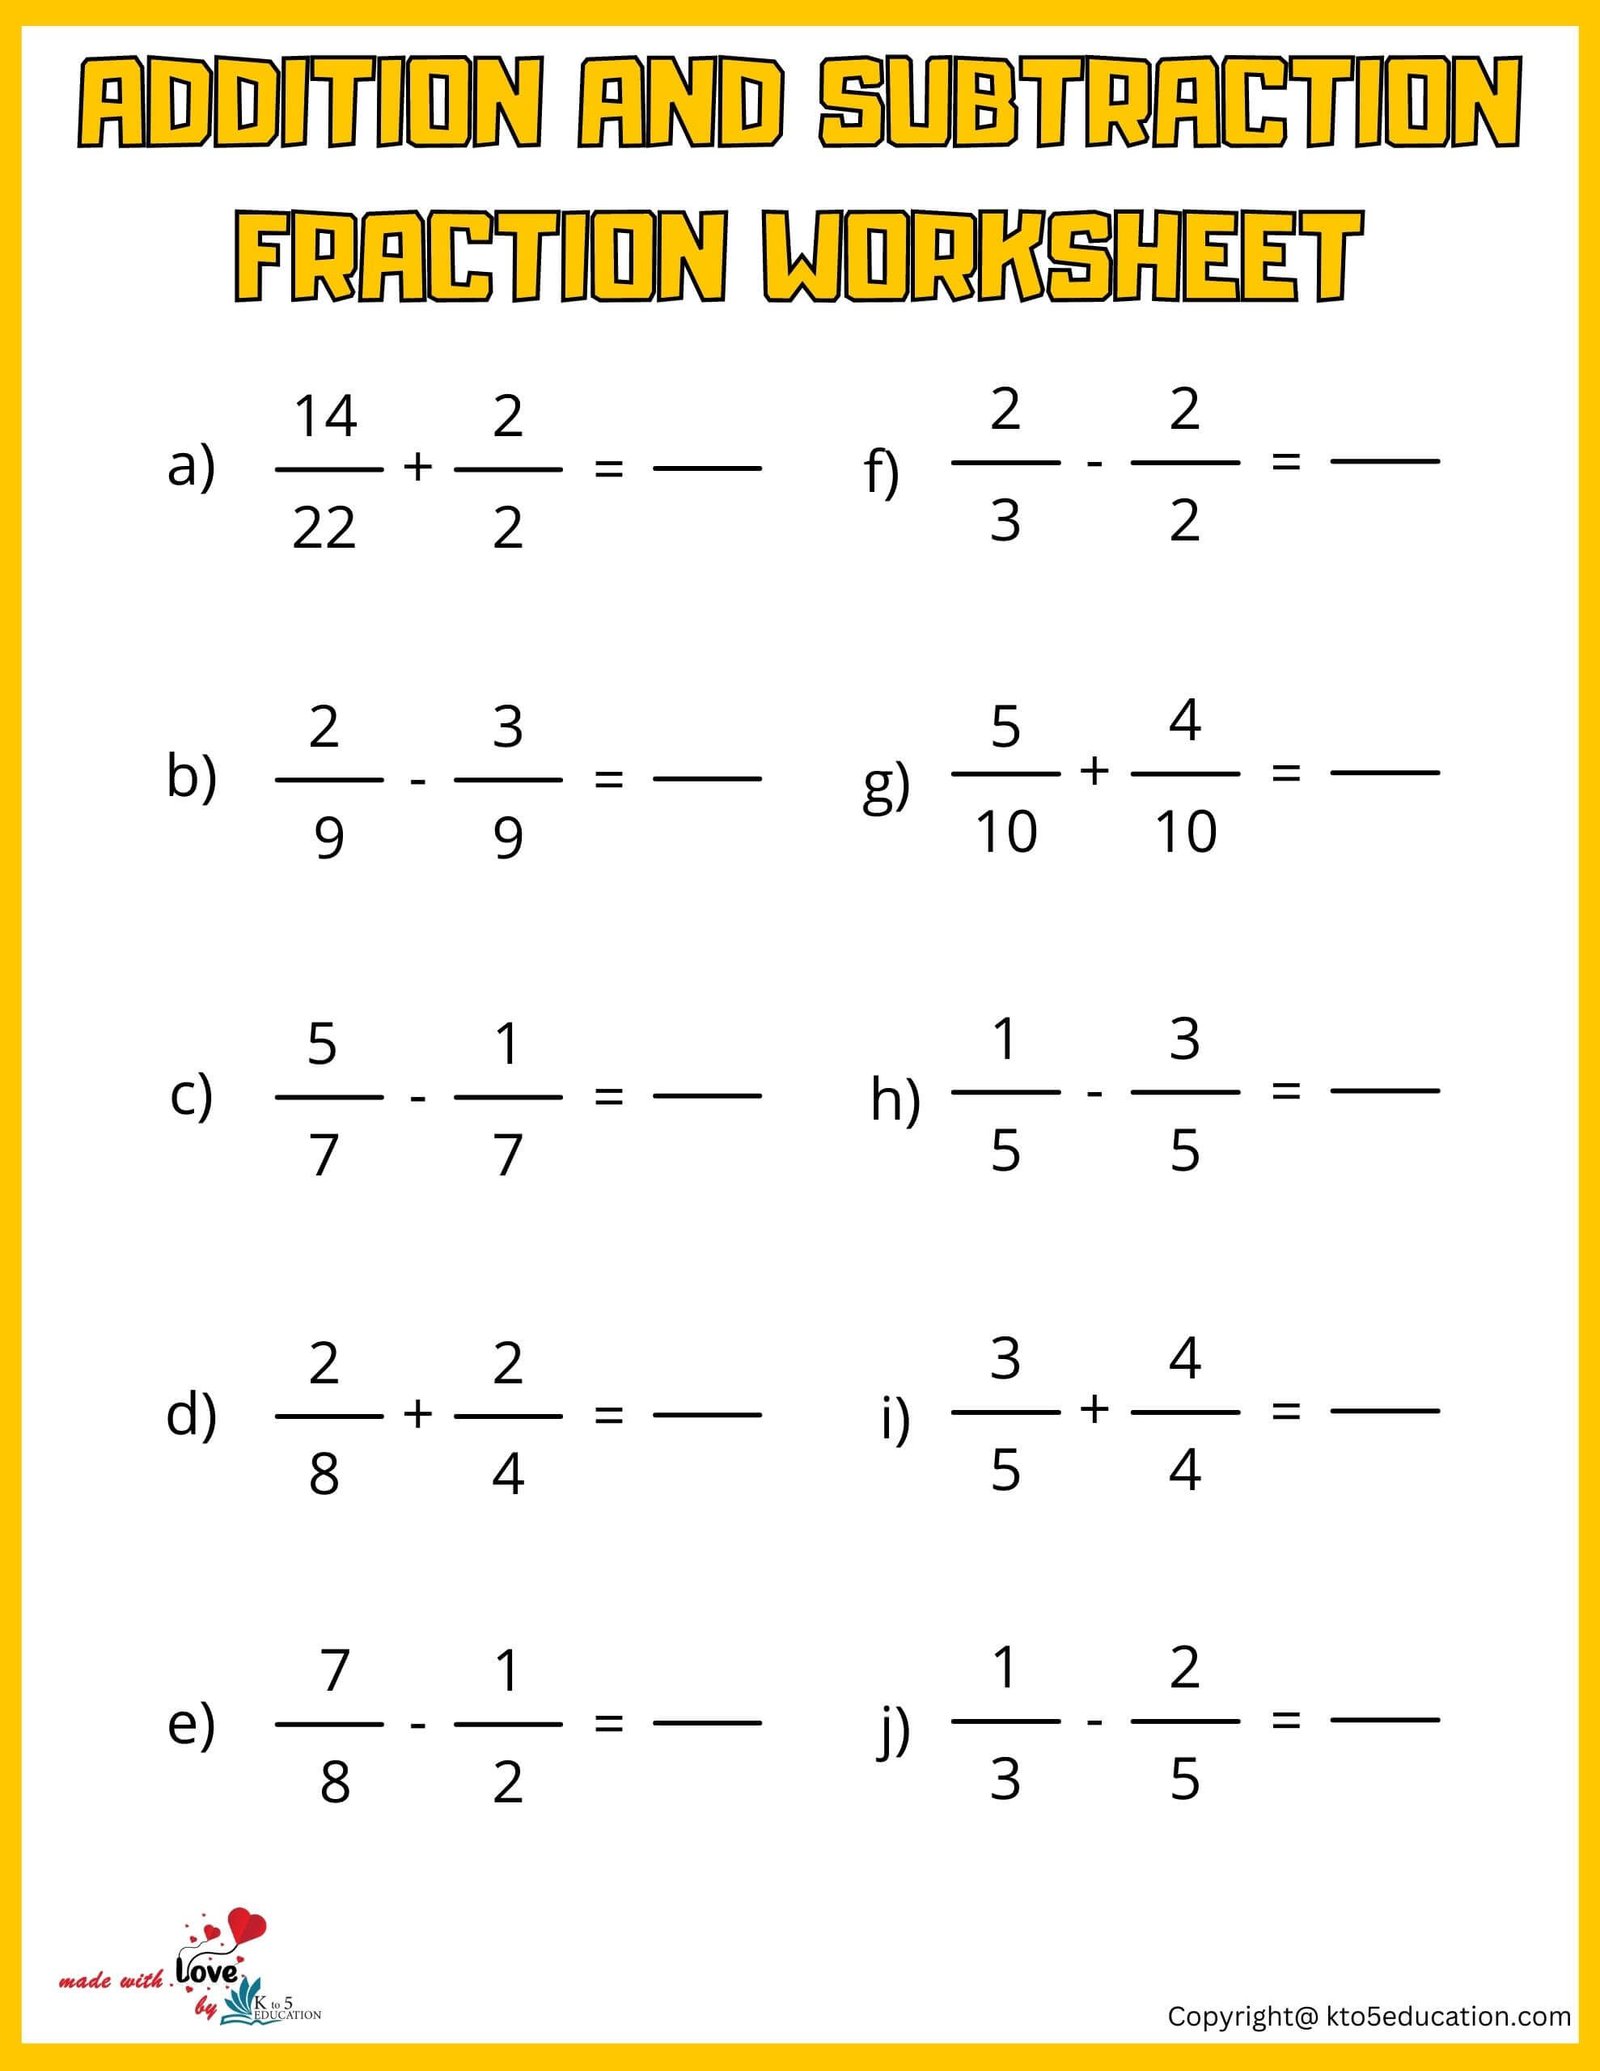 Add And Subtract Fraction Worksheet For Fourth Grade